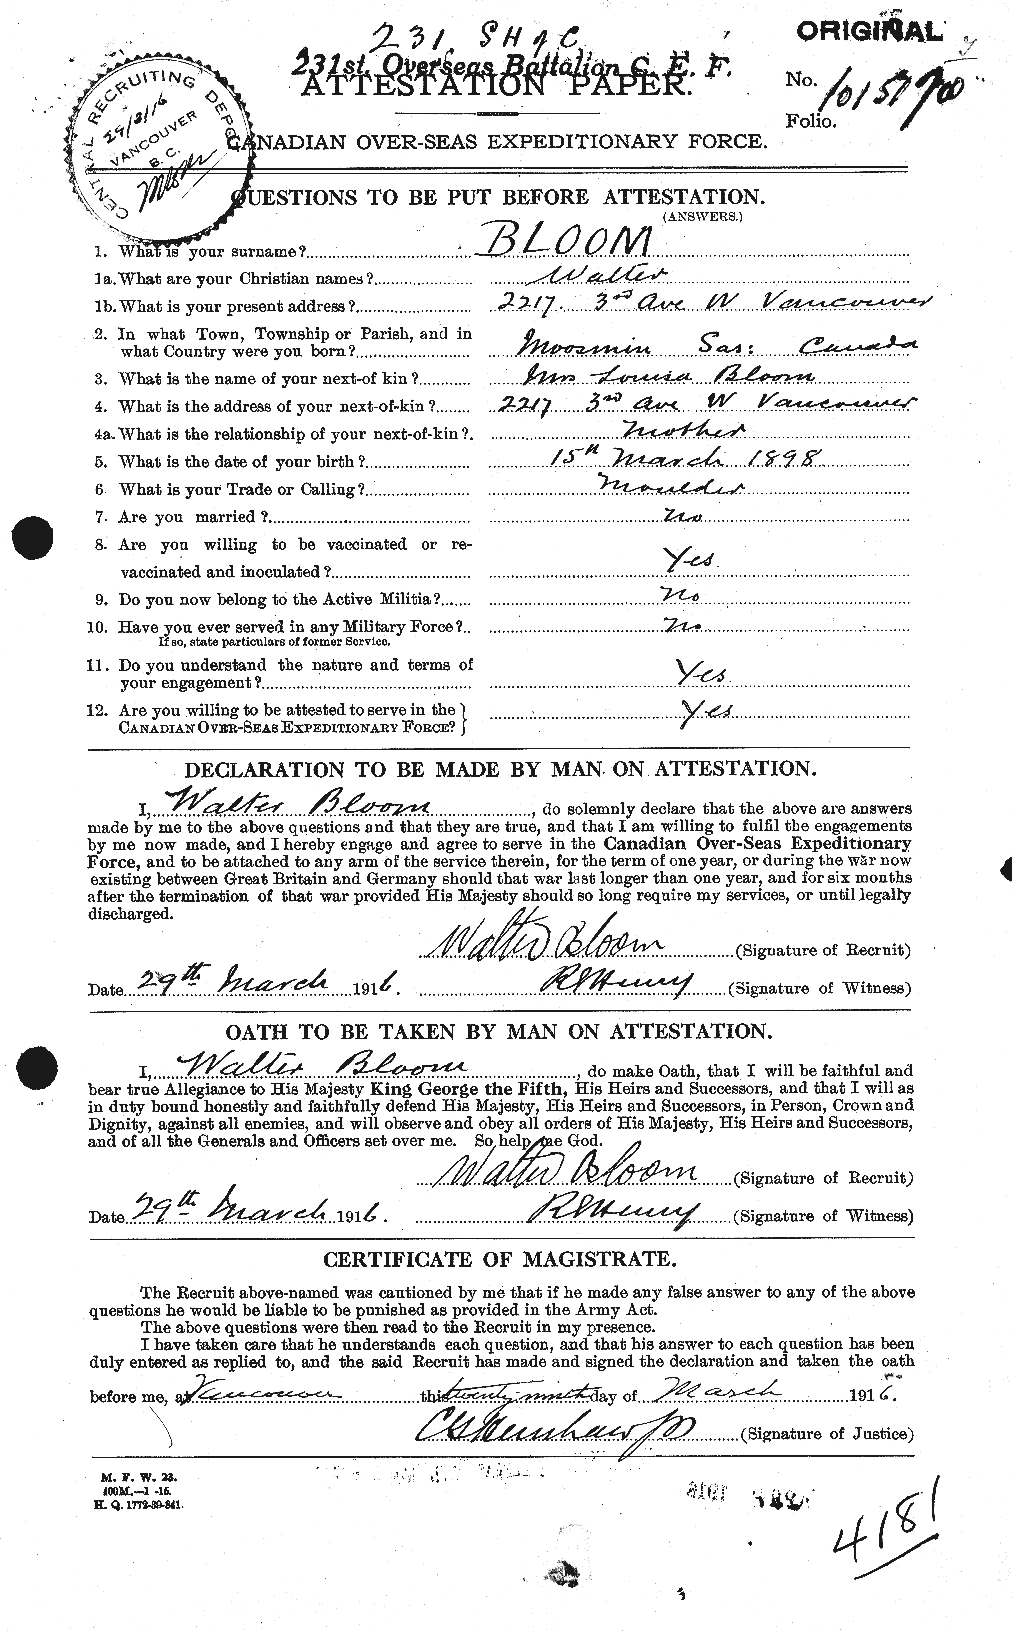 Personnel Records of the First World War - CEF 248578a